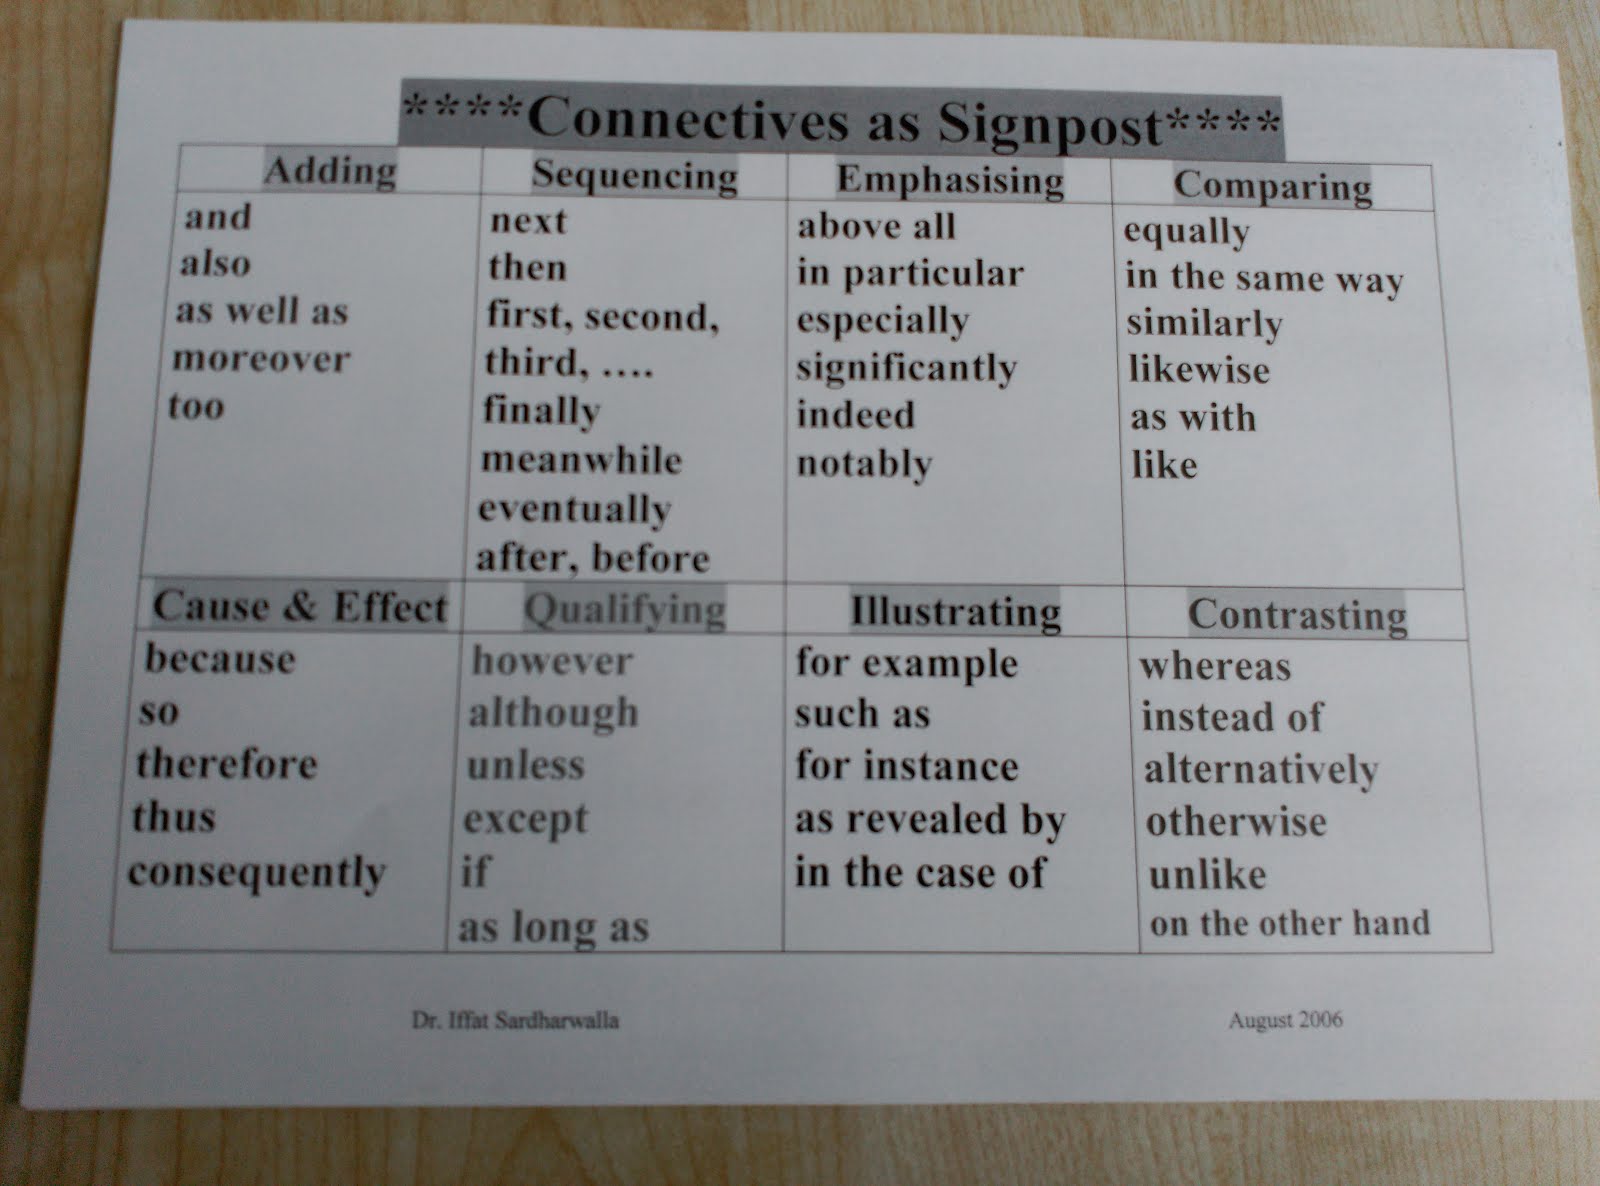 Connectives as Signpost. We use connectives to join and unite sentences and paragraphs.